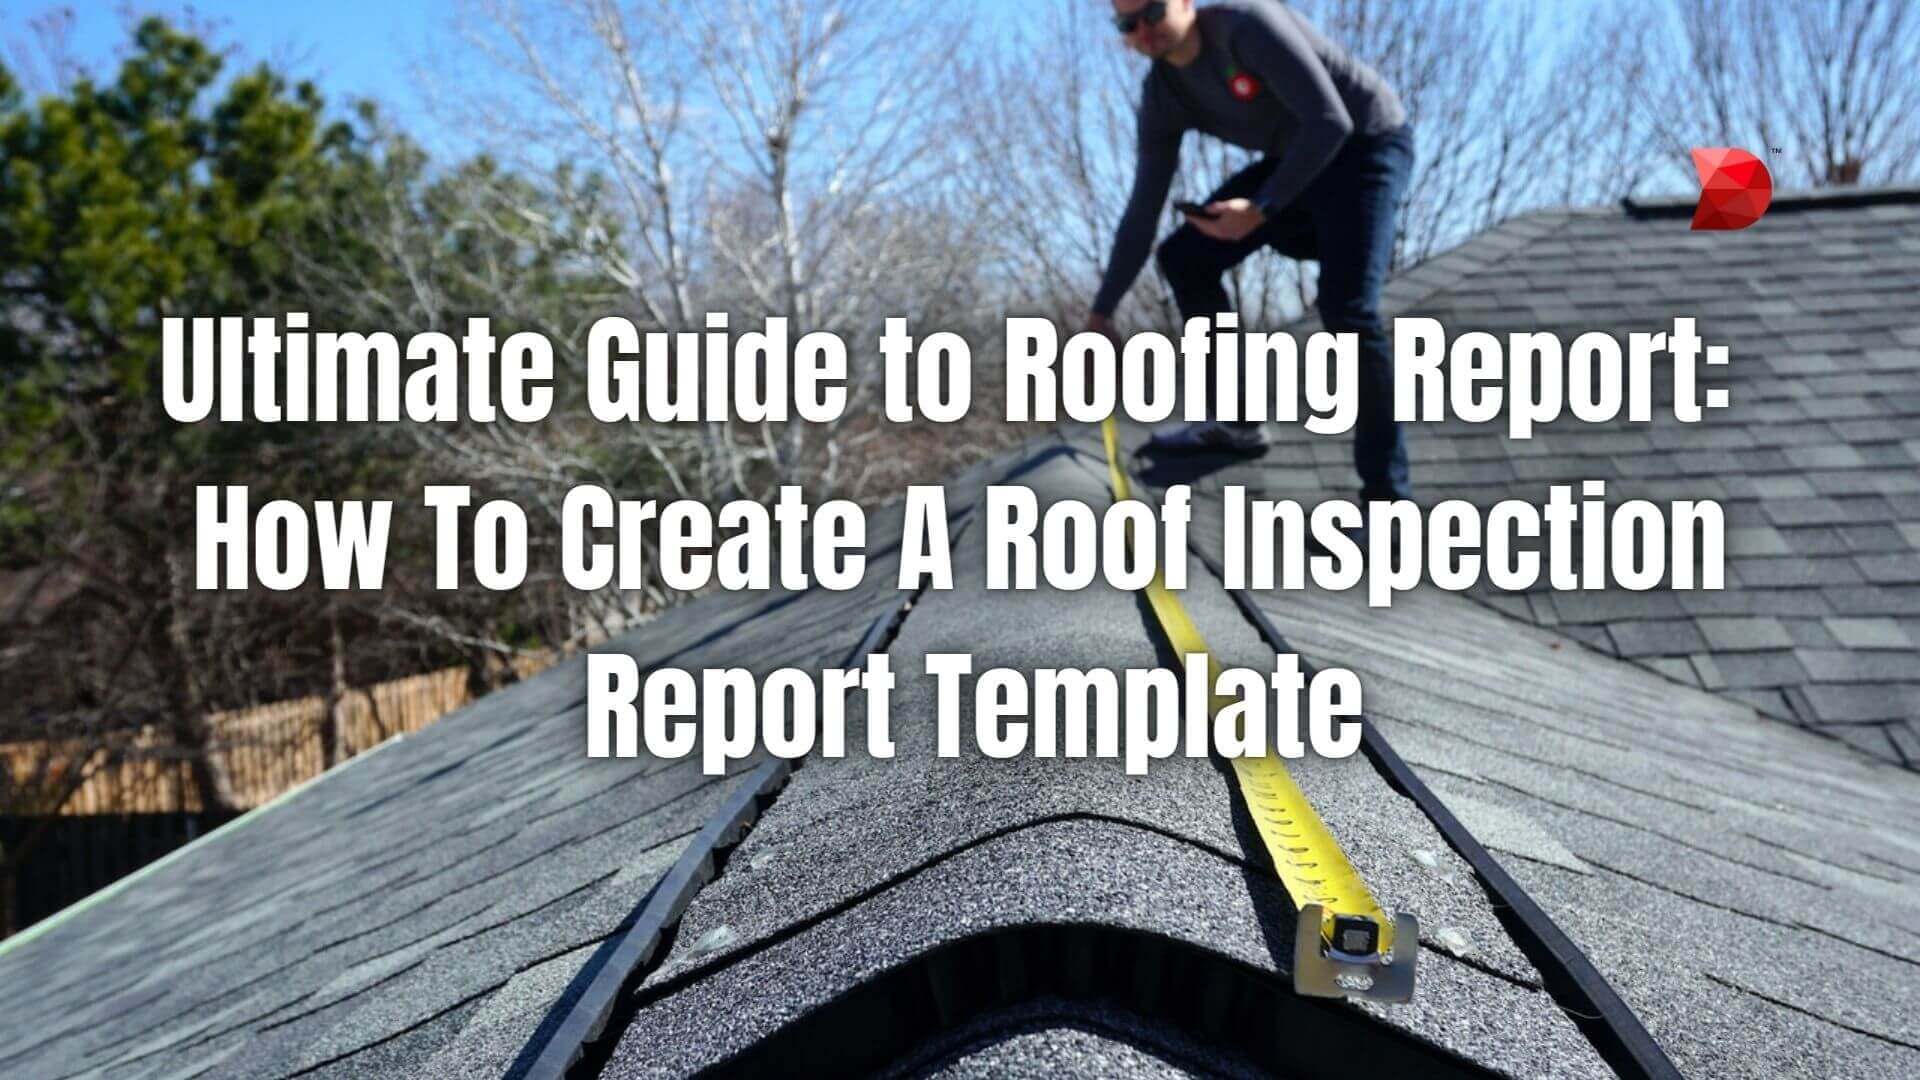 Empower your roofing business with our guide to roofing report. Learn how to create flawless inspection report templates effortlessly.